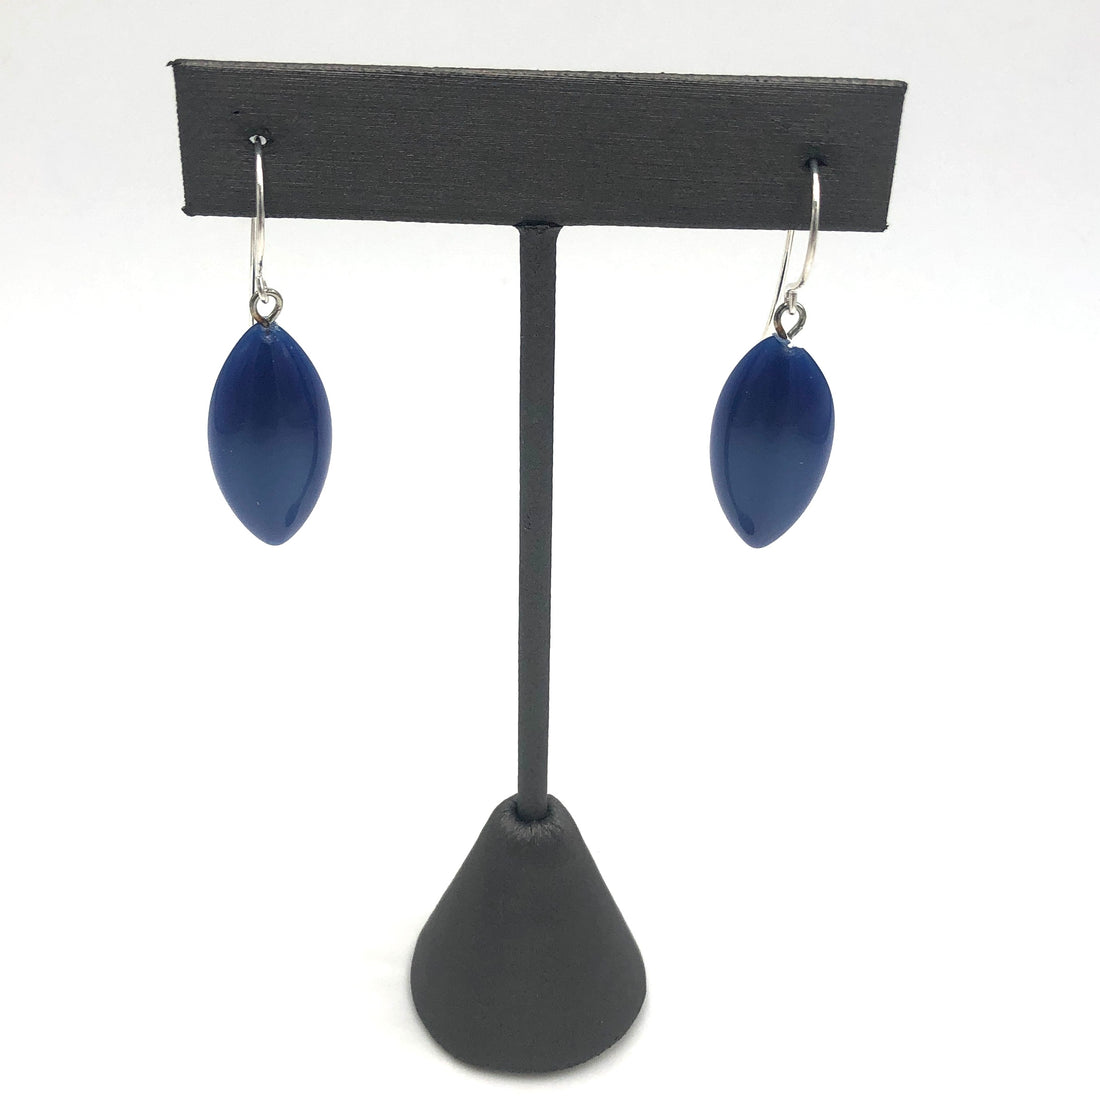 marquis shaped blue earrings on a stand